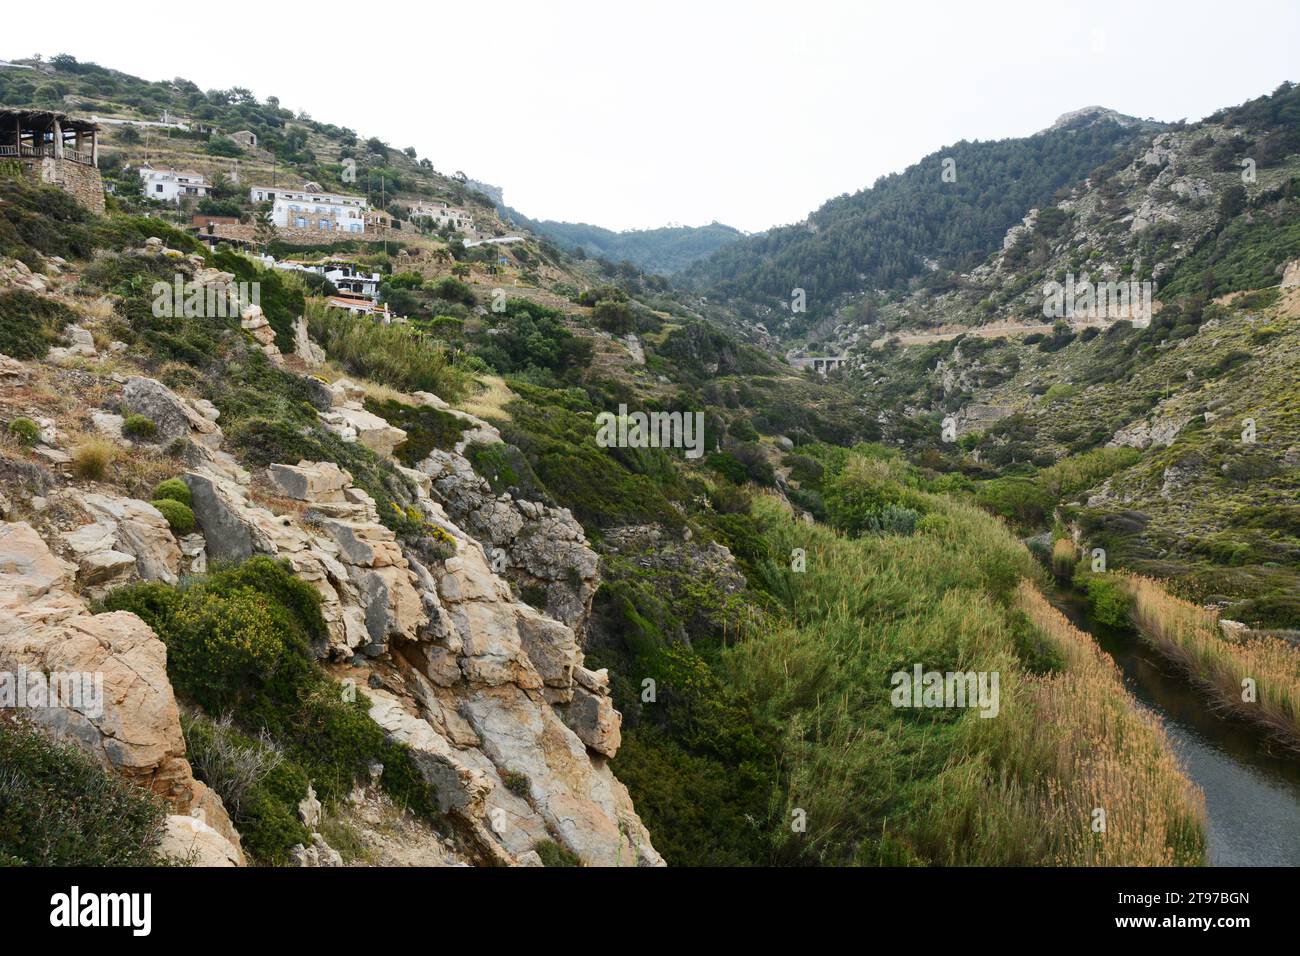 The mountain village of Nas. on the edge of the Chalaris Canyon, on the north coast of Ikaria, a 'blue zone' in the Greek Islands, Greece. Stock Photo